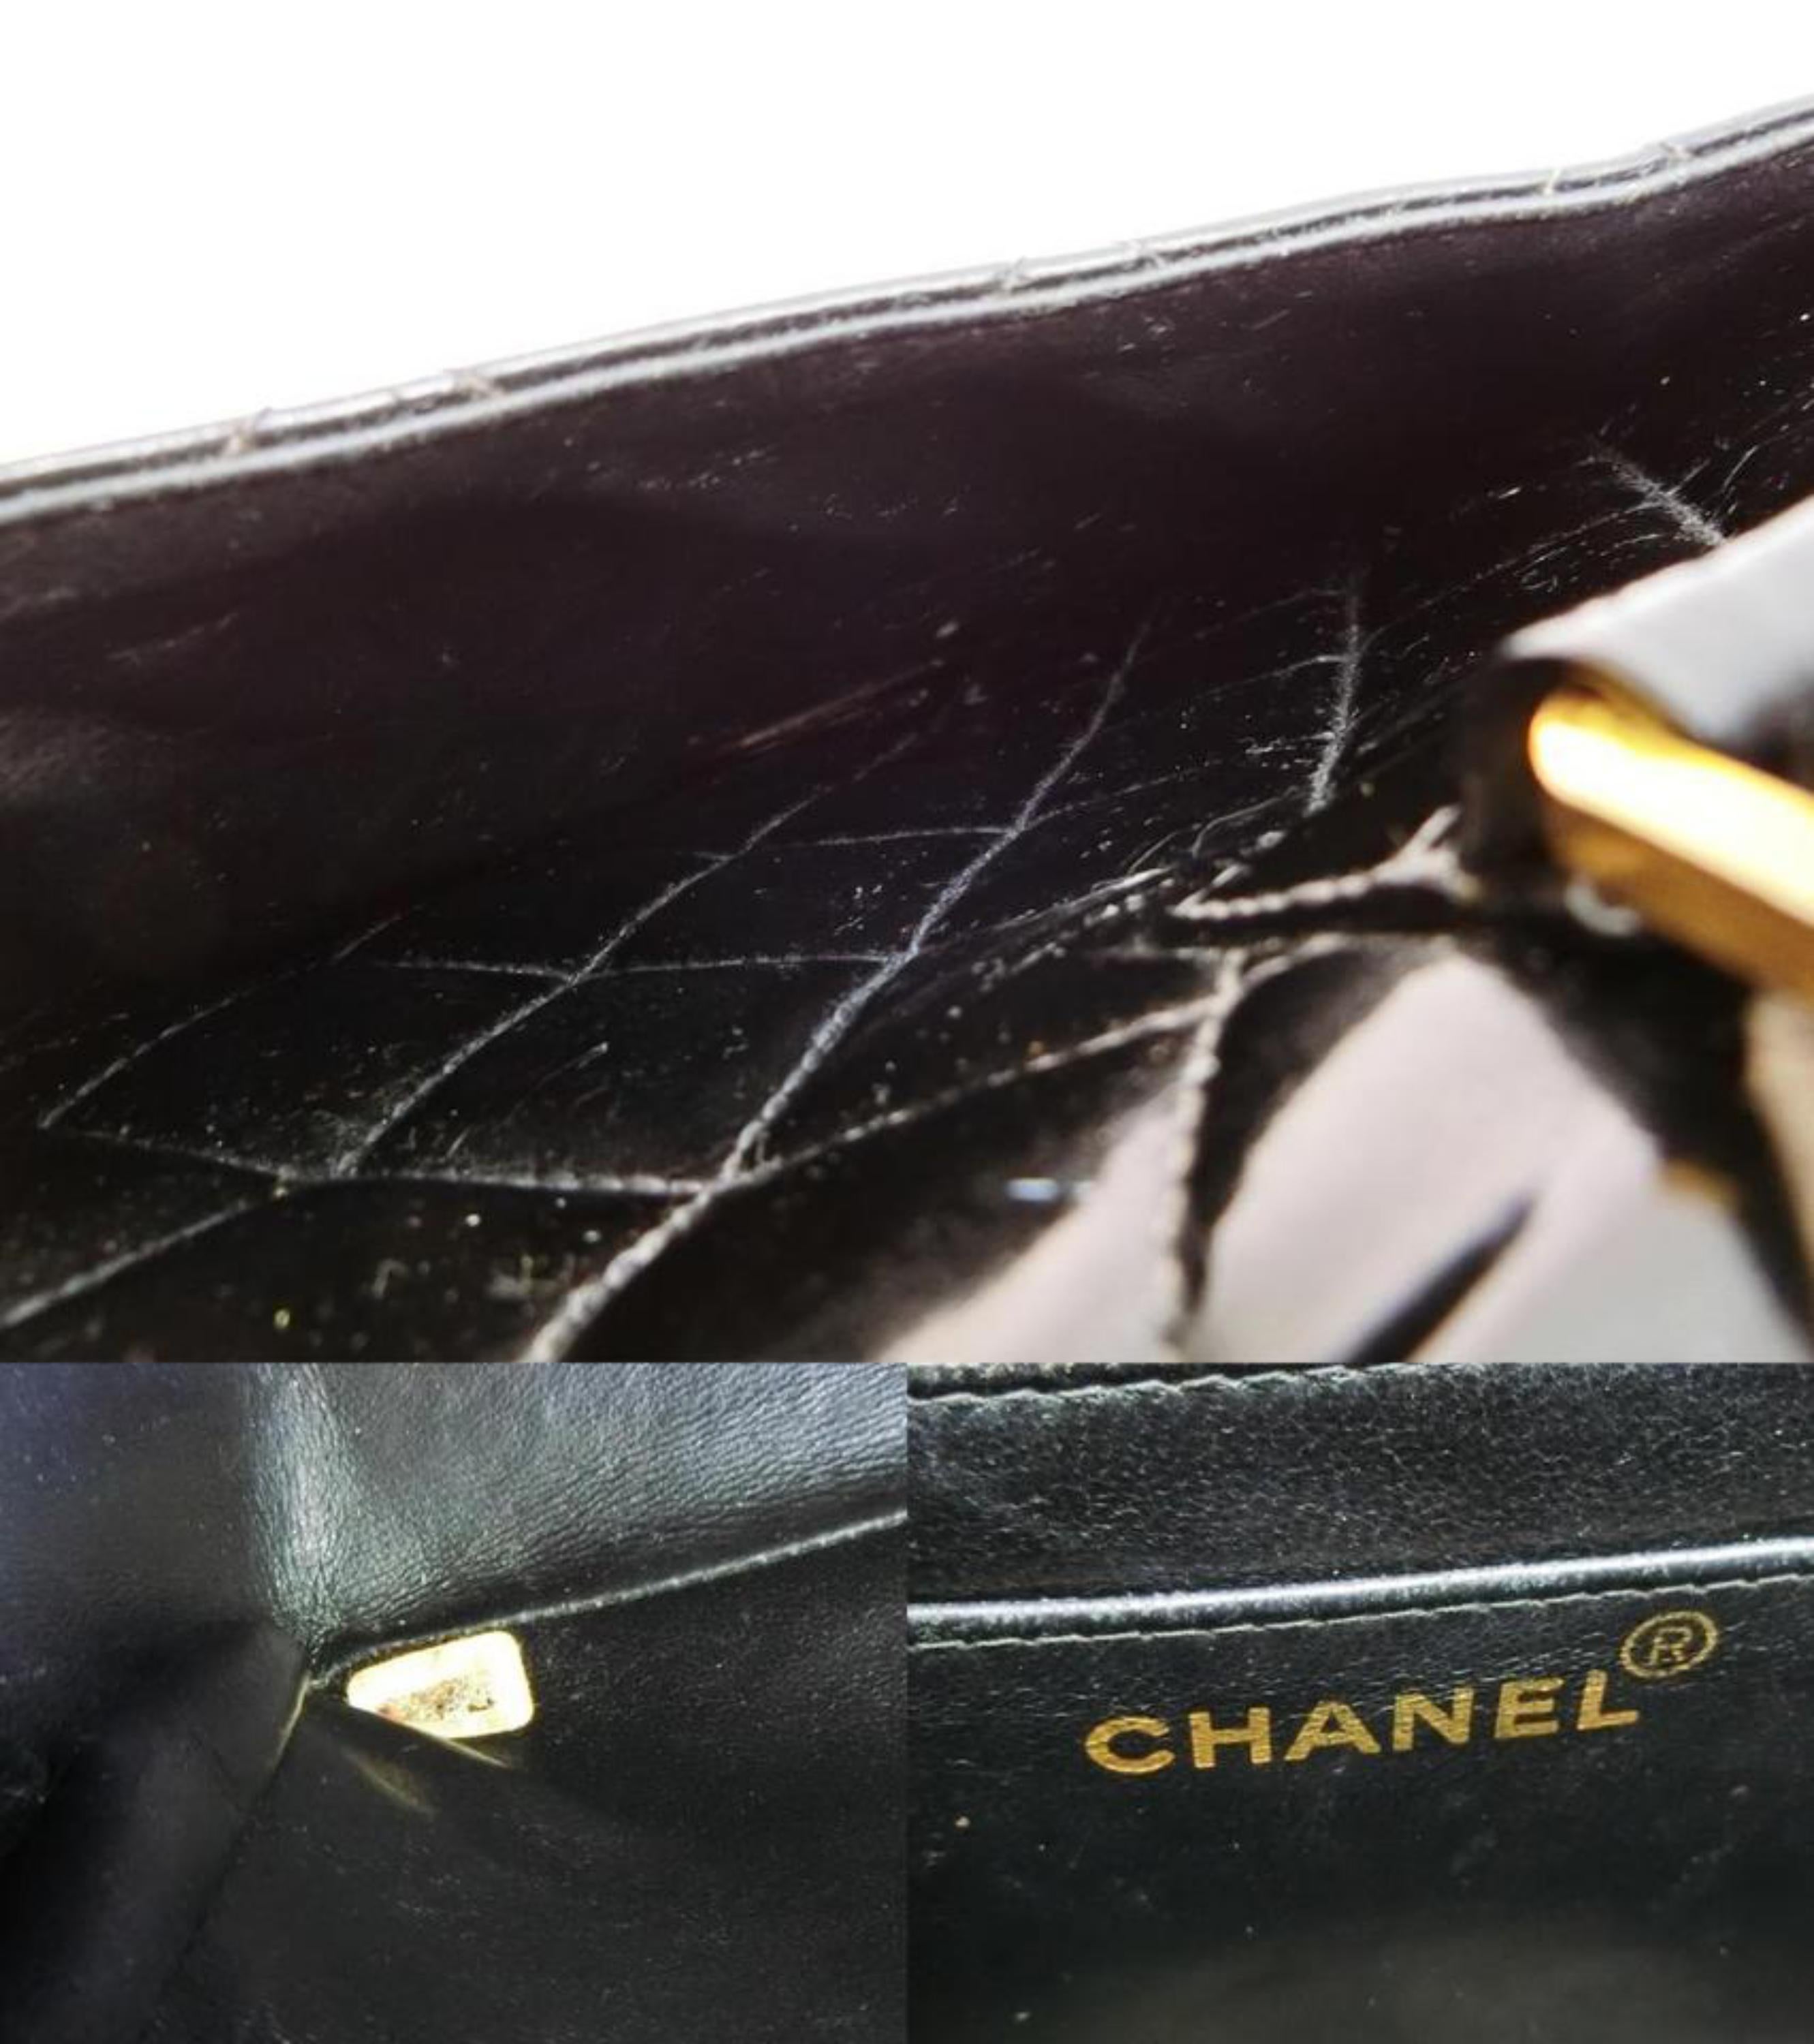 Chanel Backpack Quilted Chain Jumbo Flap 227899 Patent Leather Shoulder Bag In Good Condition For Sale In Forest Hills, NY